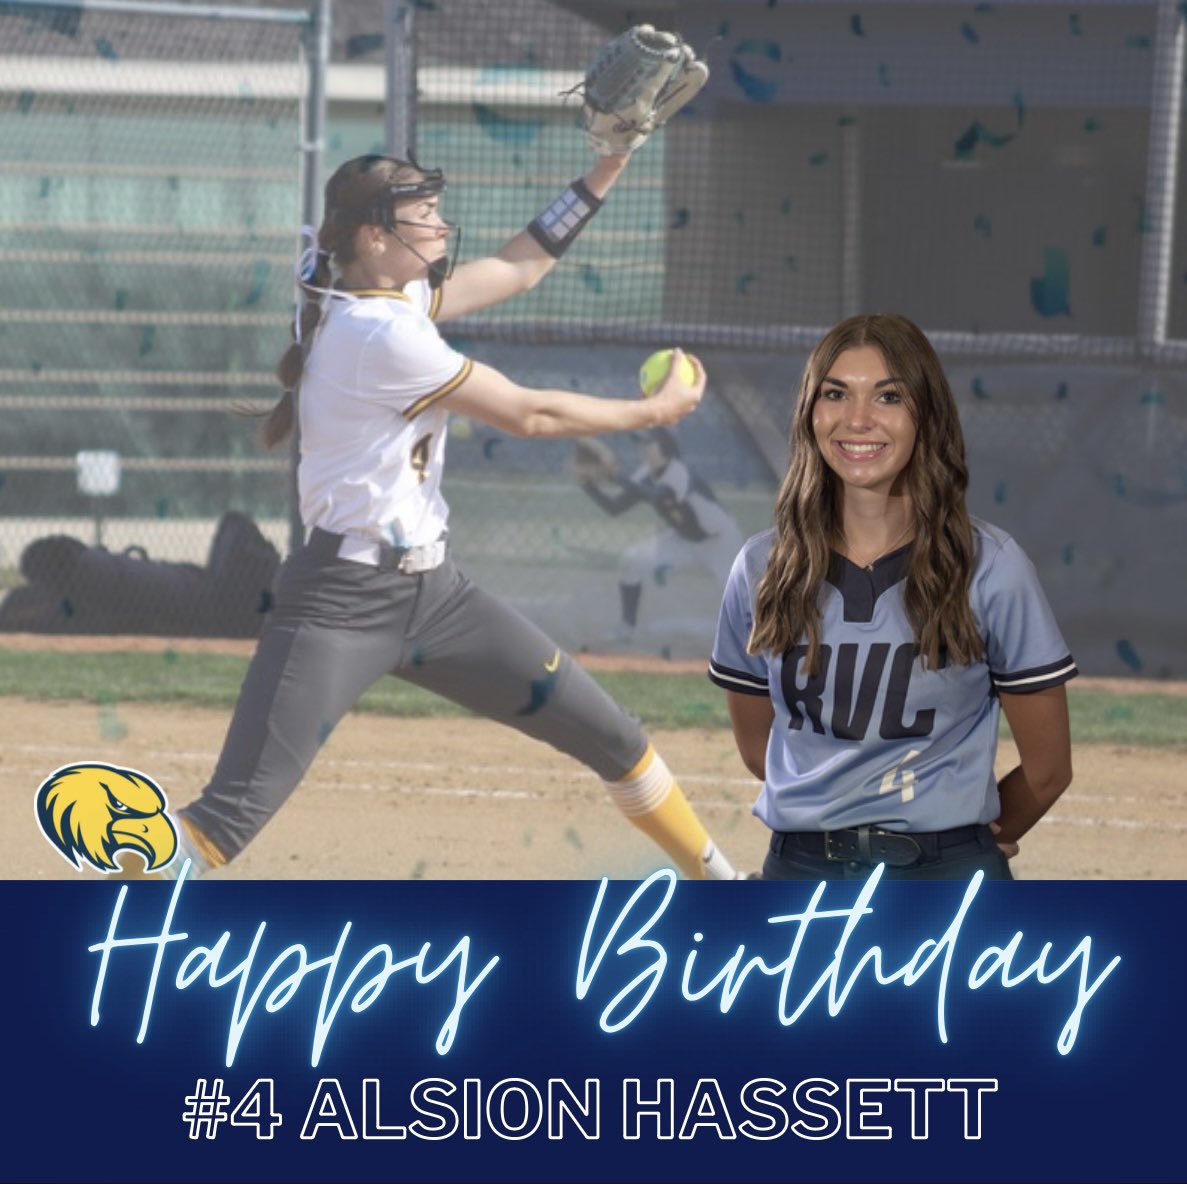 Before the day ends, we want to a wish a very happy birthday to #4 Alison Hassett